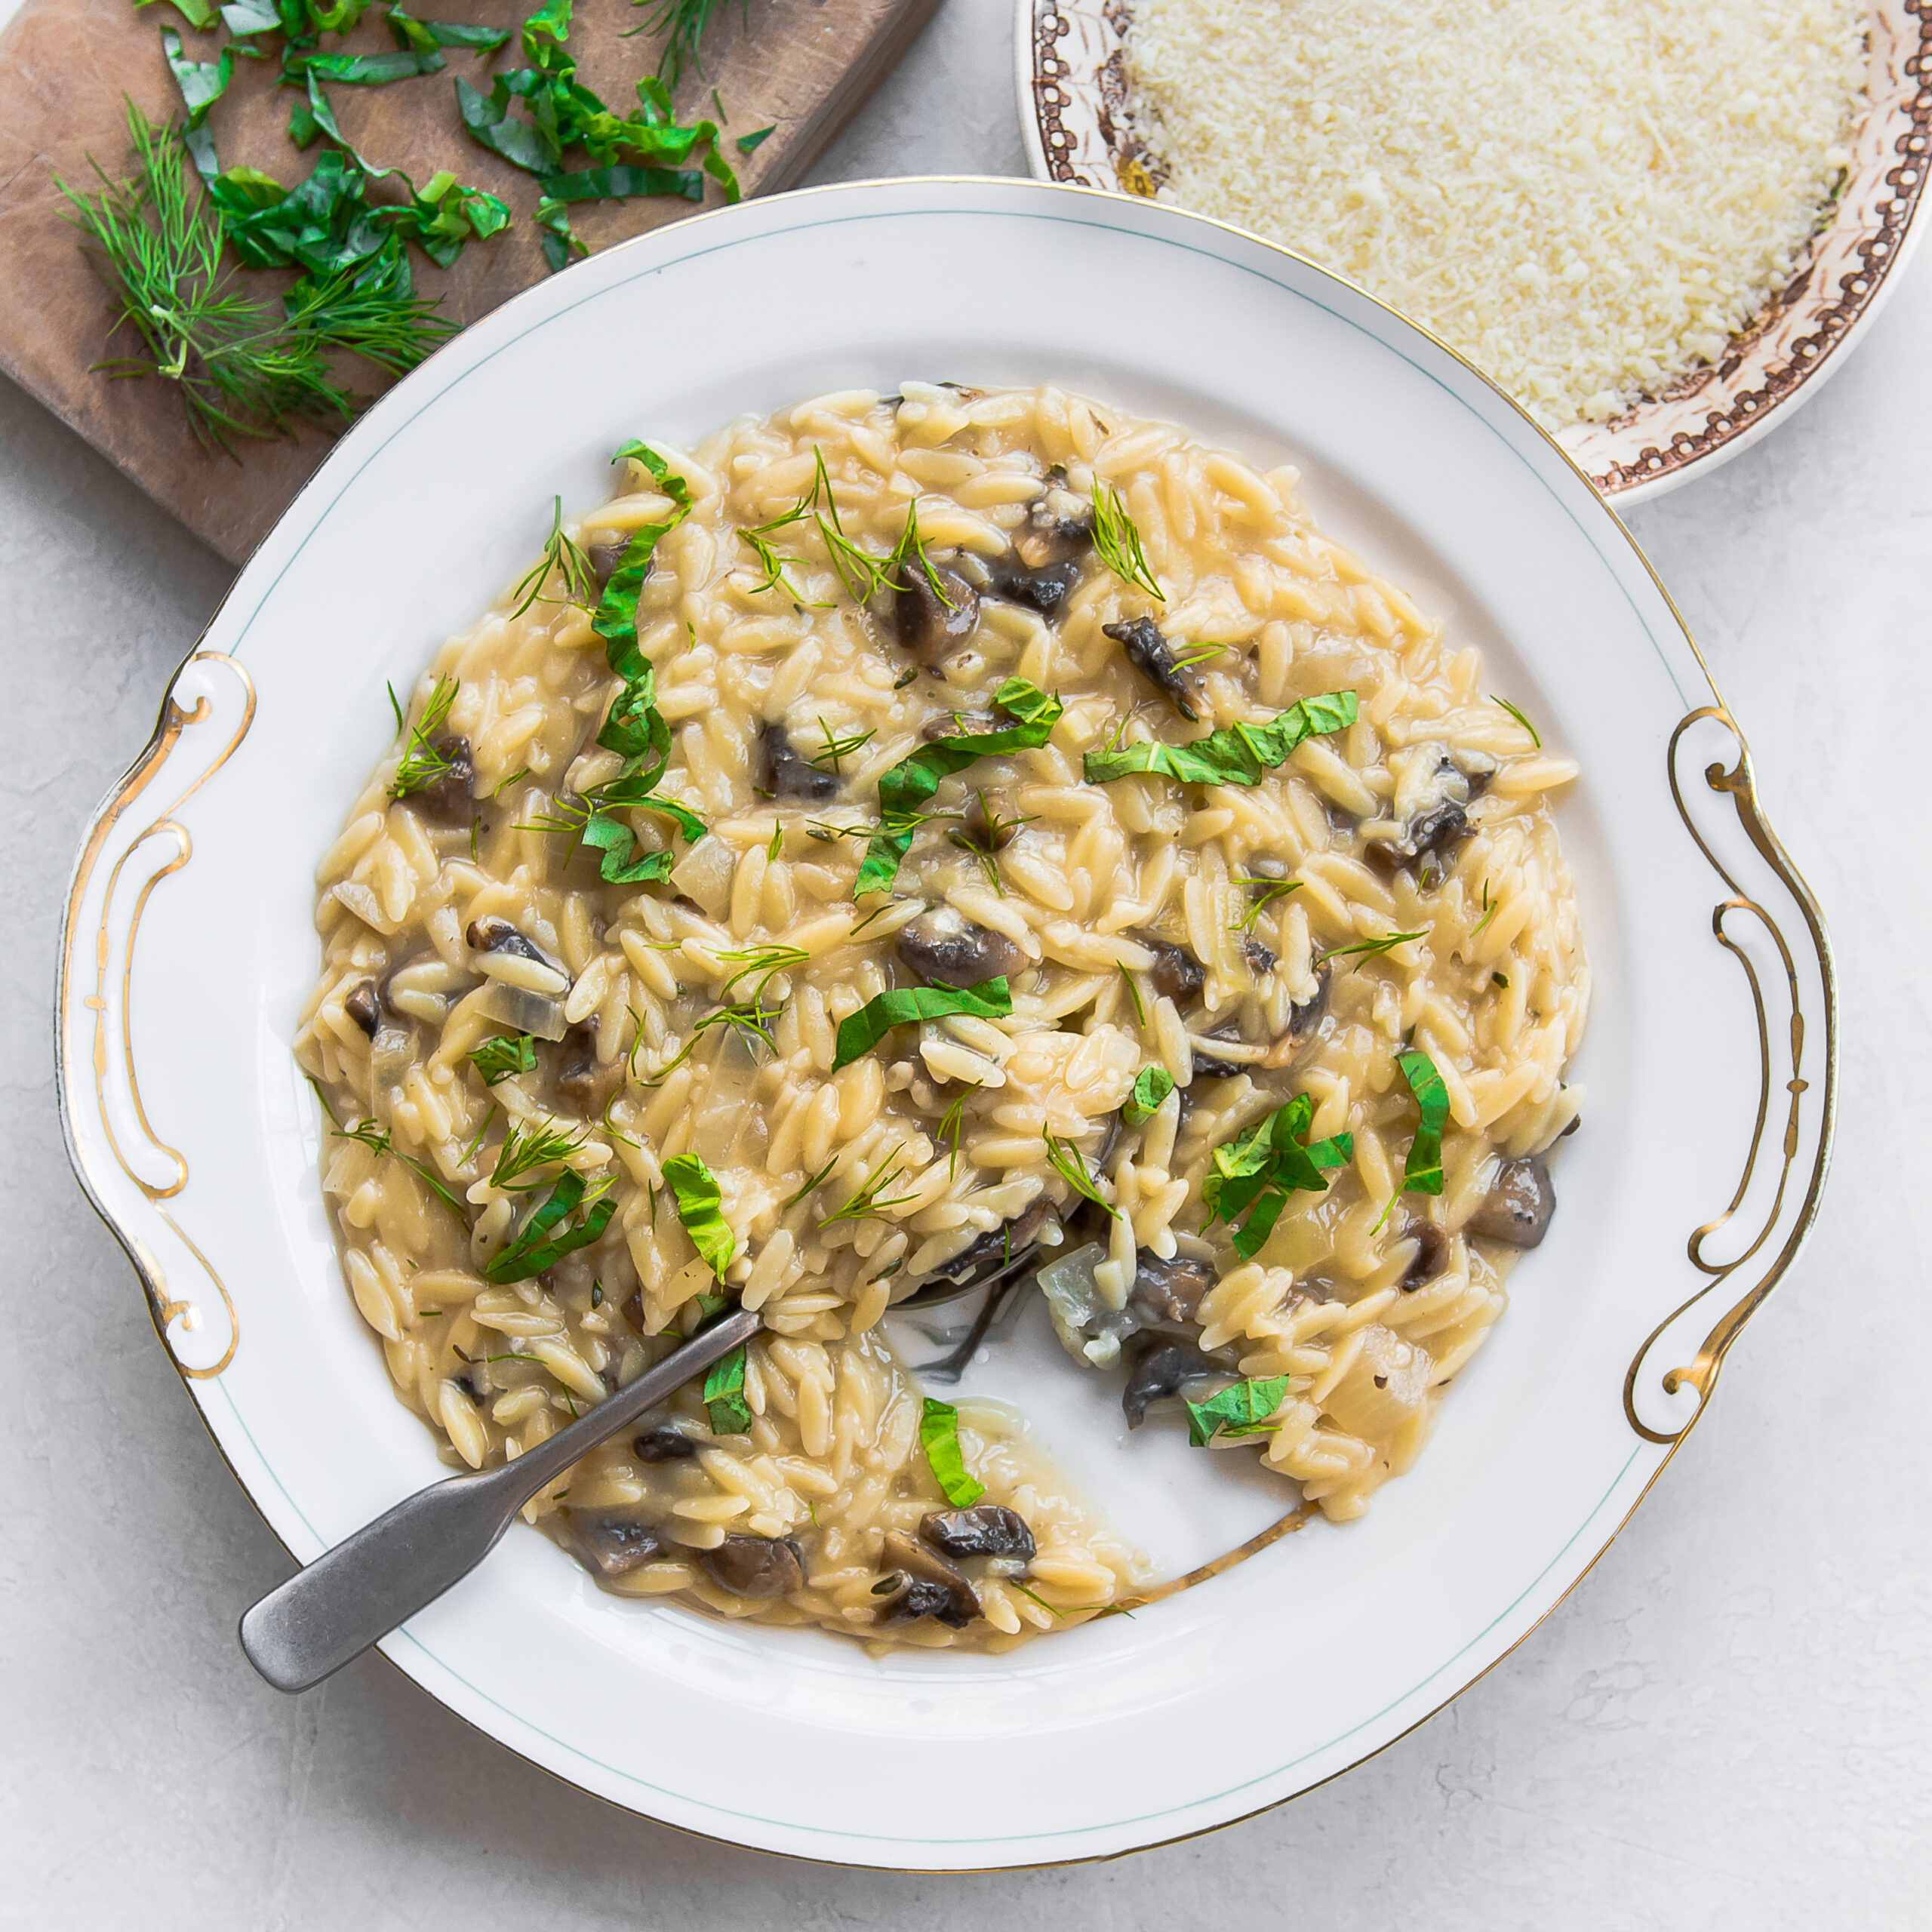 Herbed Orzo Risotto with Wild Mushrooms